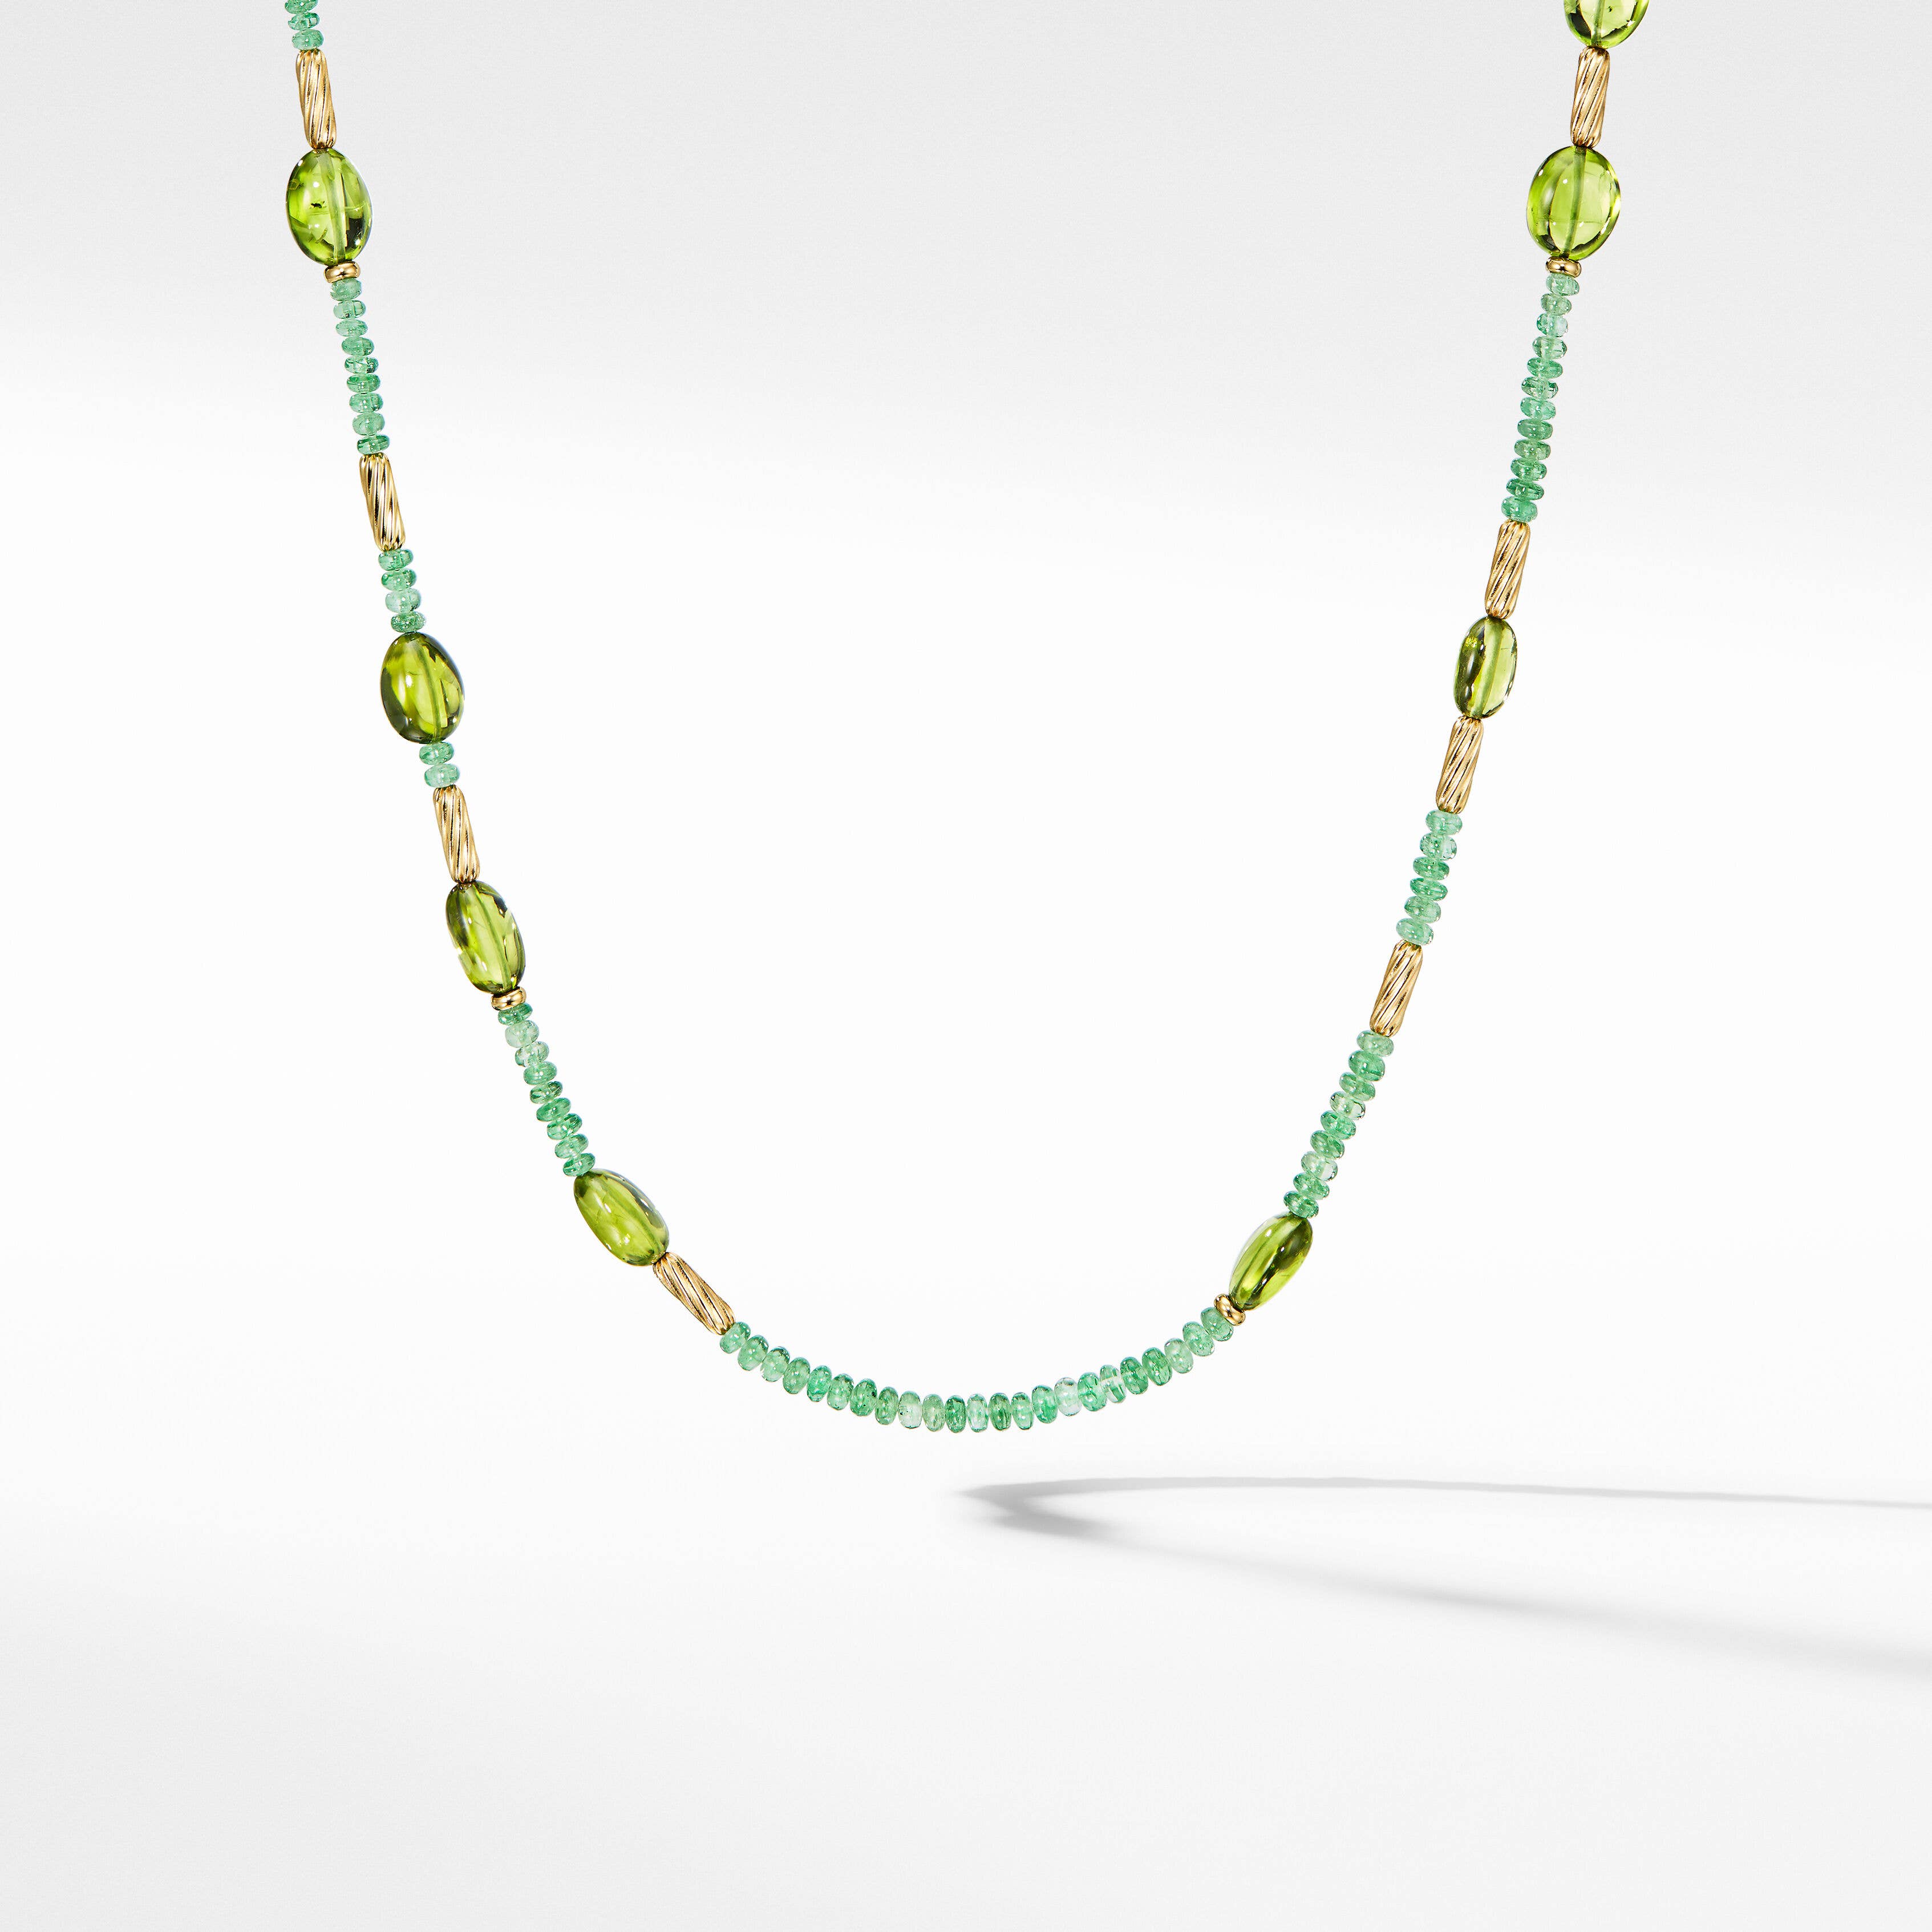 Tweejoux Necklace with Tsavorites, Peridot and 18K Yellow Gold